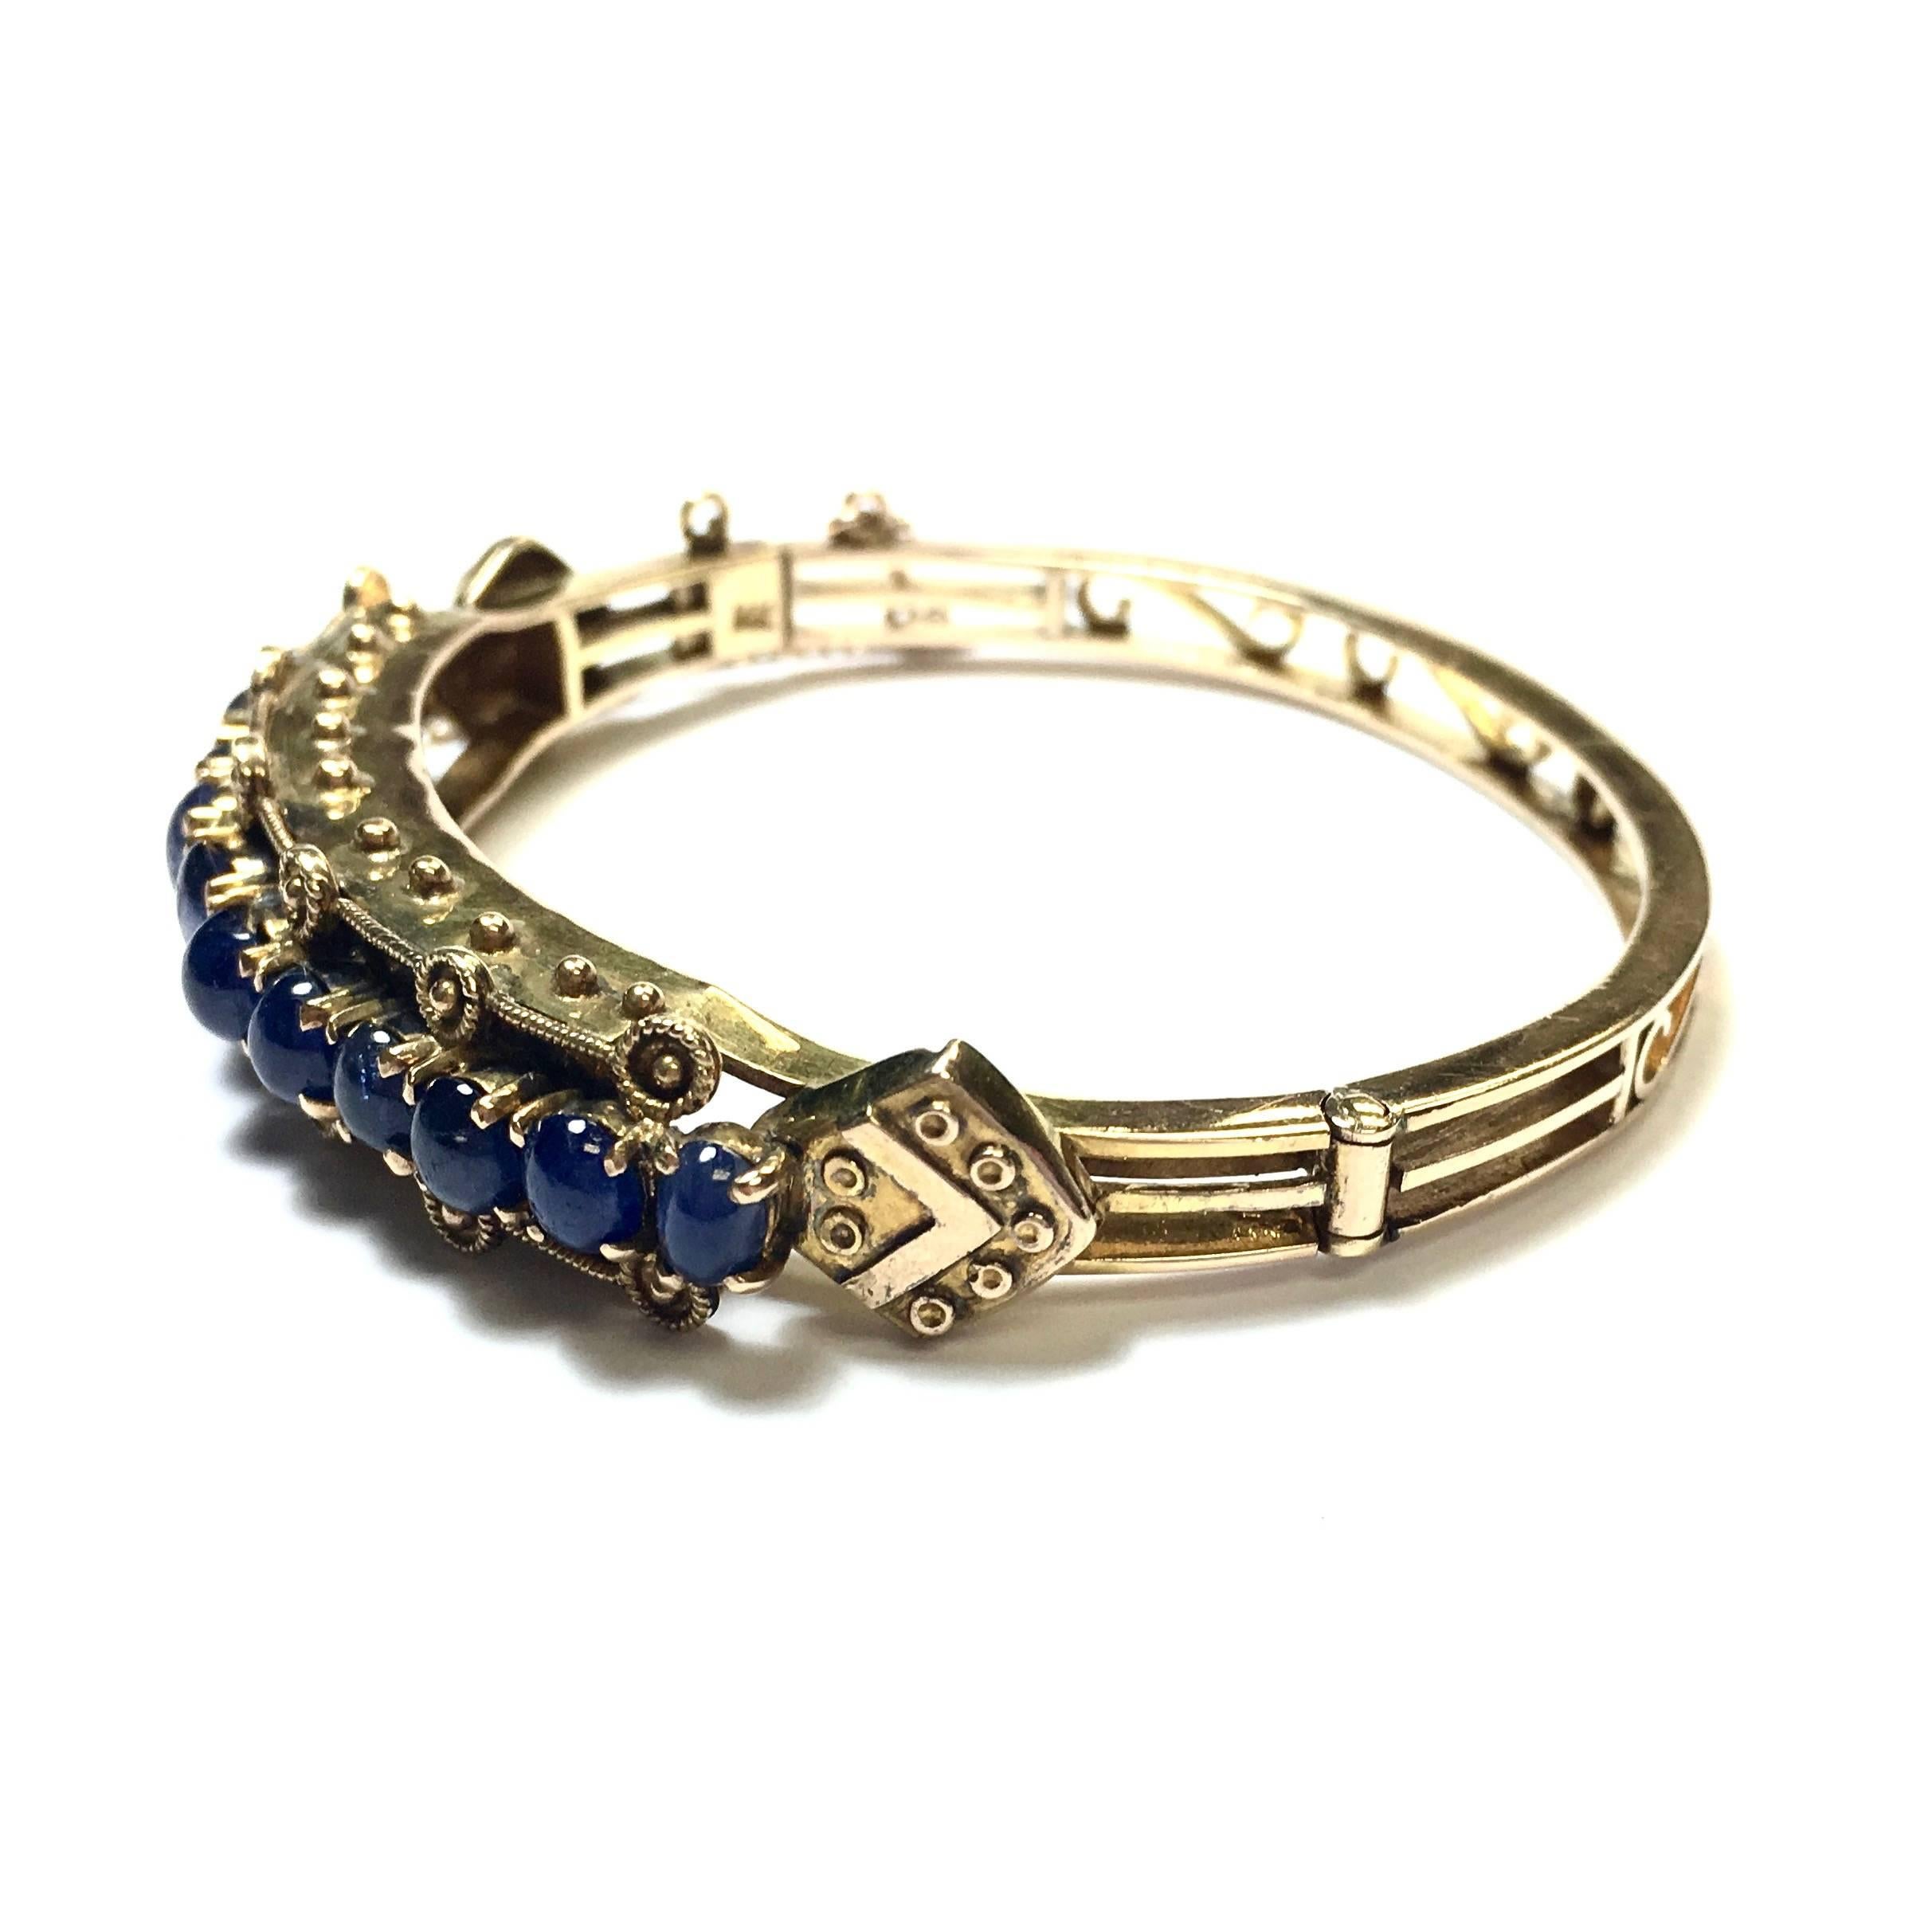 Gorgeous  hinged bangle bracelet crafted in 14K yellow gold, featuring 12 graduating cabochon cut blue sapphires  set on the front, suuported by elaborated gold sections with beadwork, completed by open scroll design 5 mm wide back . 
Apprximate